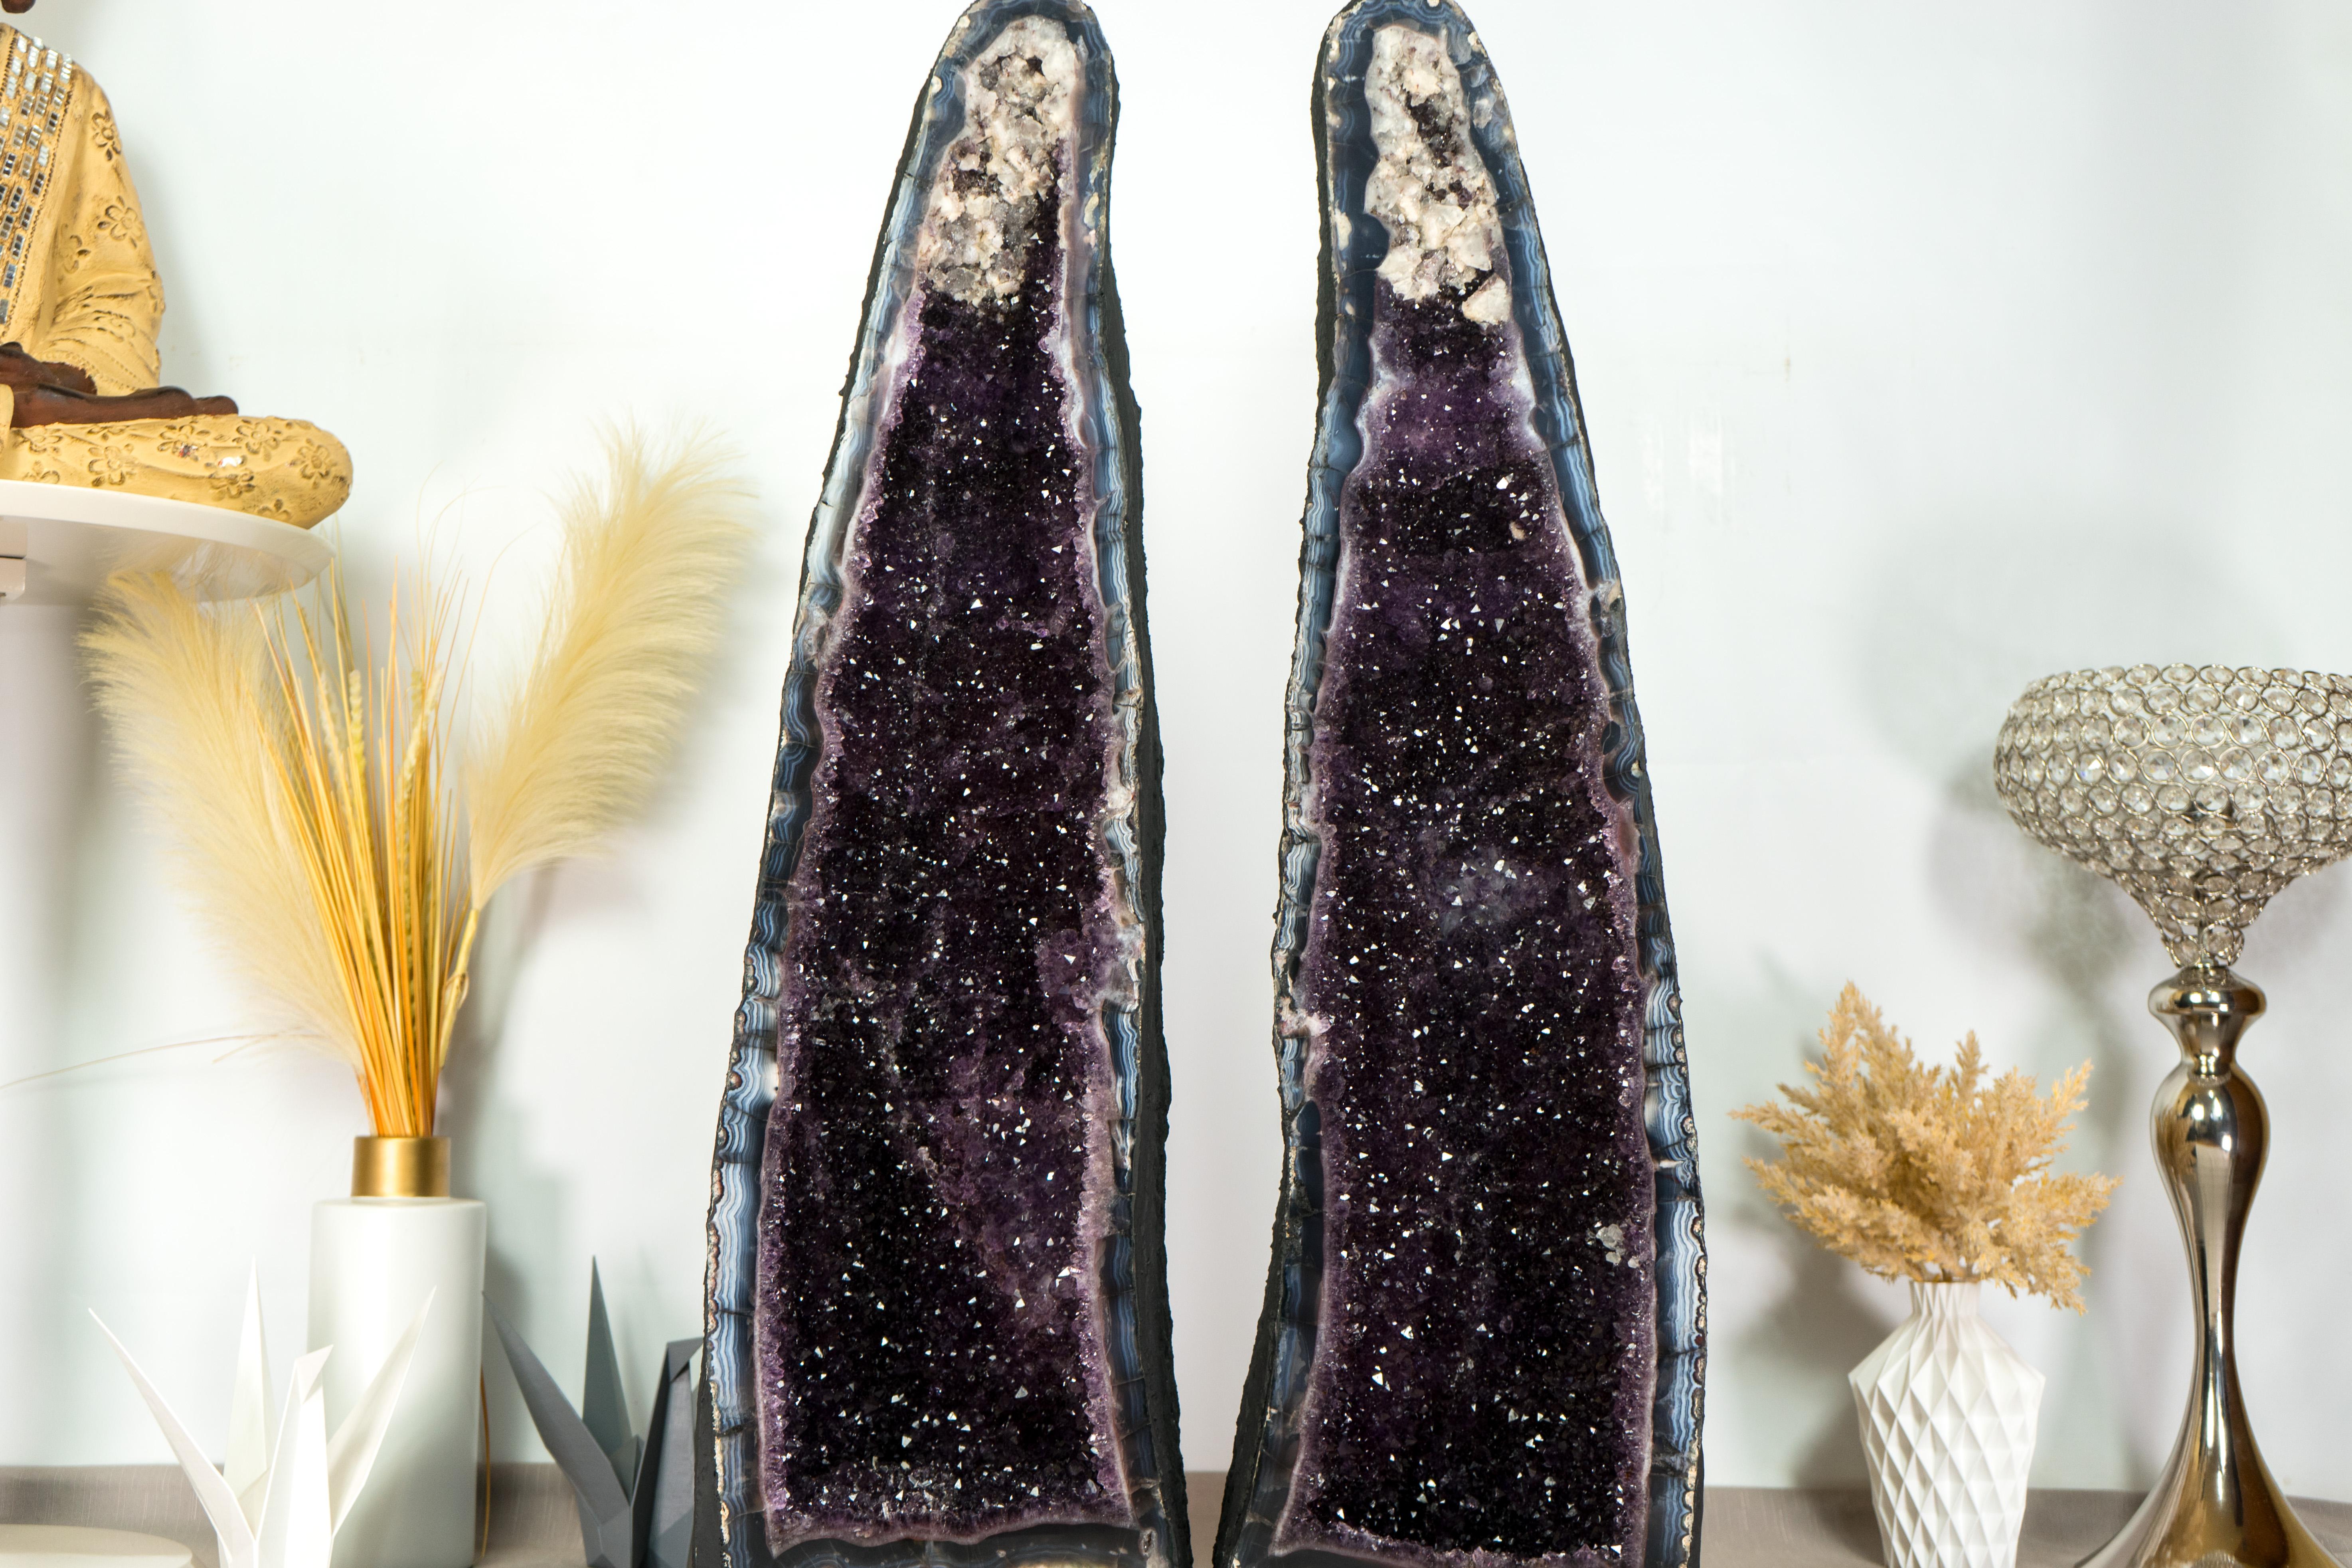 Breathtaking and beautiful, this pair of Agate with Amethyst Geodes feature spectacular blue-banded agate lines and rare, stunning aesthetics. Enhanced by shiny Amethyst that perfectly complements its beauty, this all-natural geode artwork is